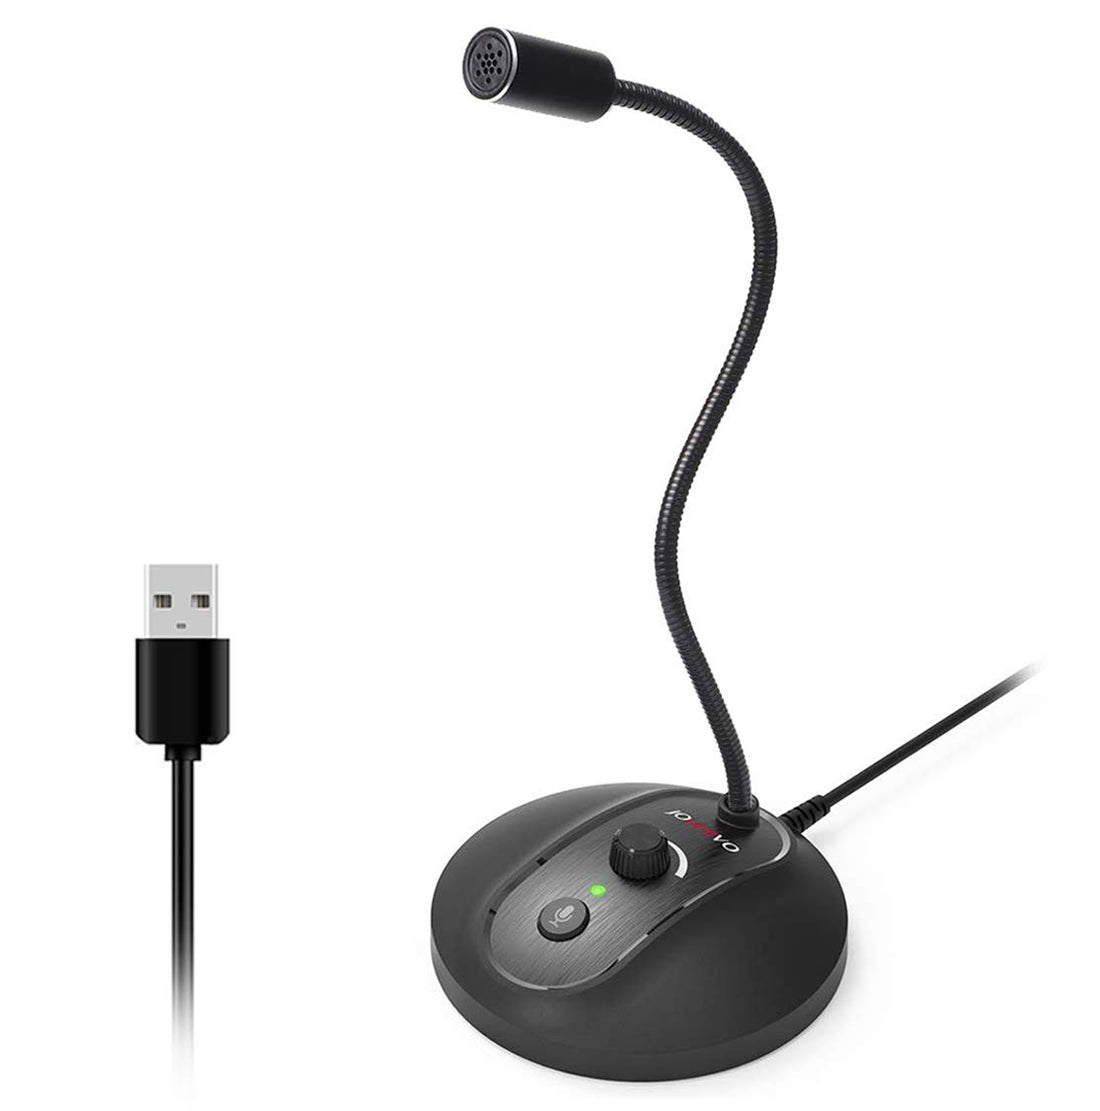 USB Computer Microphone with Mute Button,Plug&Play Condenser,Desktop, PC, Laptop, Mac, PS4 Mic with Stand & LED Indicator -360 Gooseneck Design -Recording, Dictation, Youtube, Skype, Gaming, Streaming